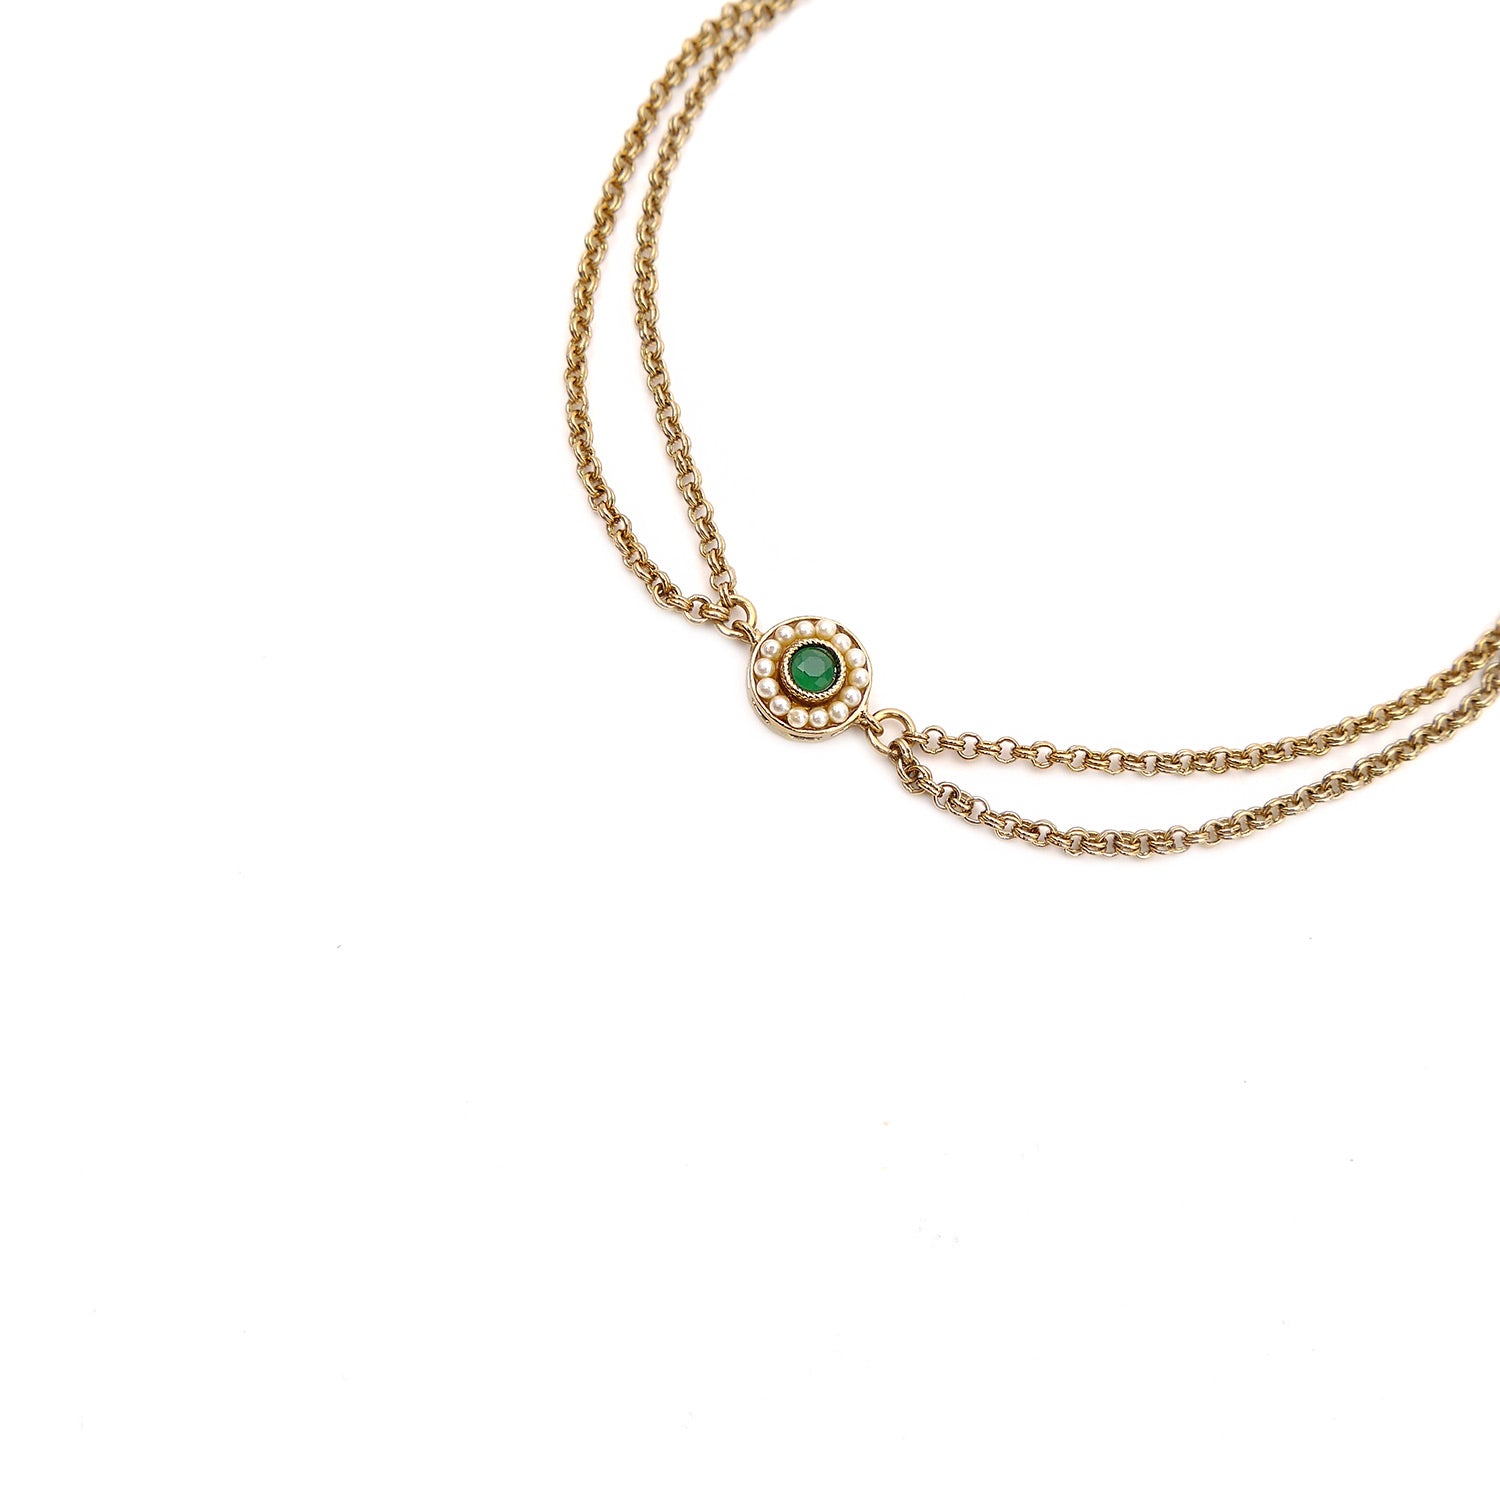 Leela Double Chain Anklet in Emerald